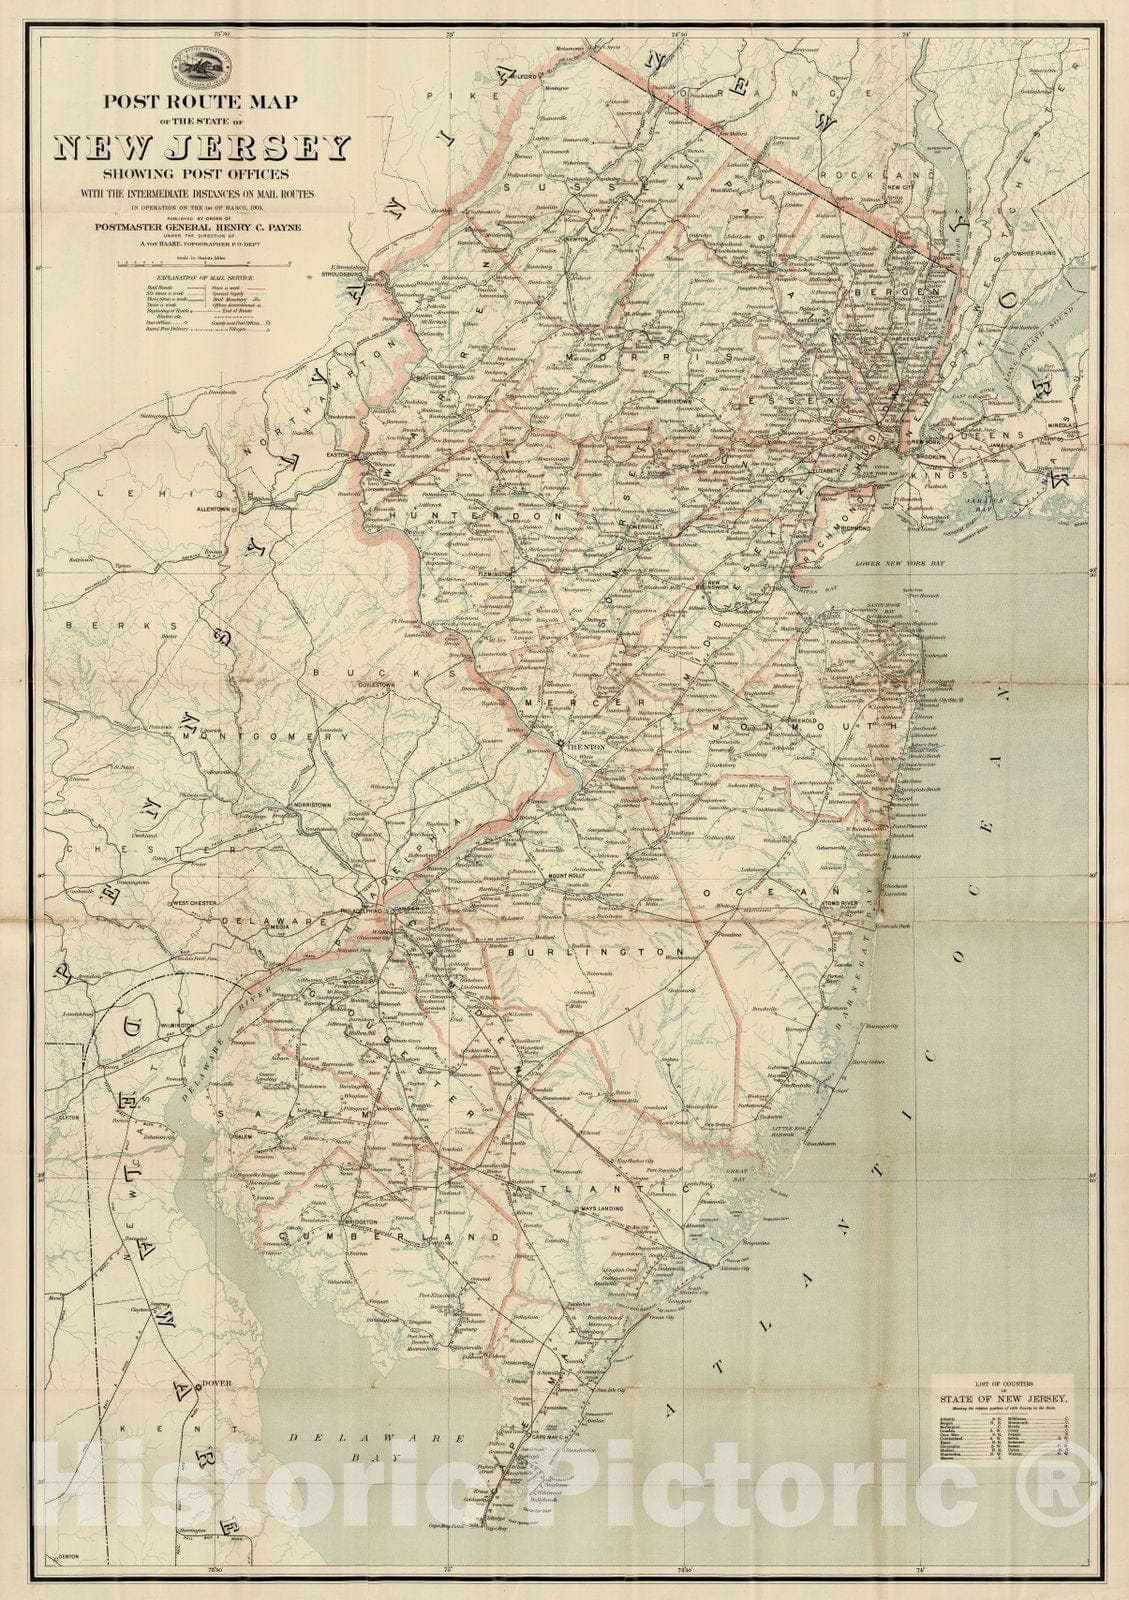 Historic Map : Post Route Map of The State of New Jersey, 1904 - Vintage Wall Art